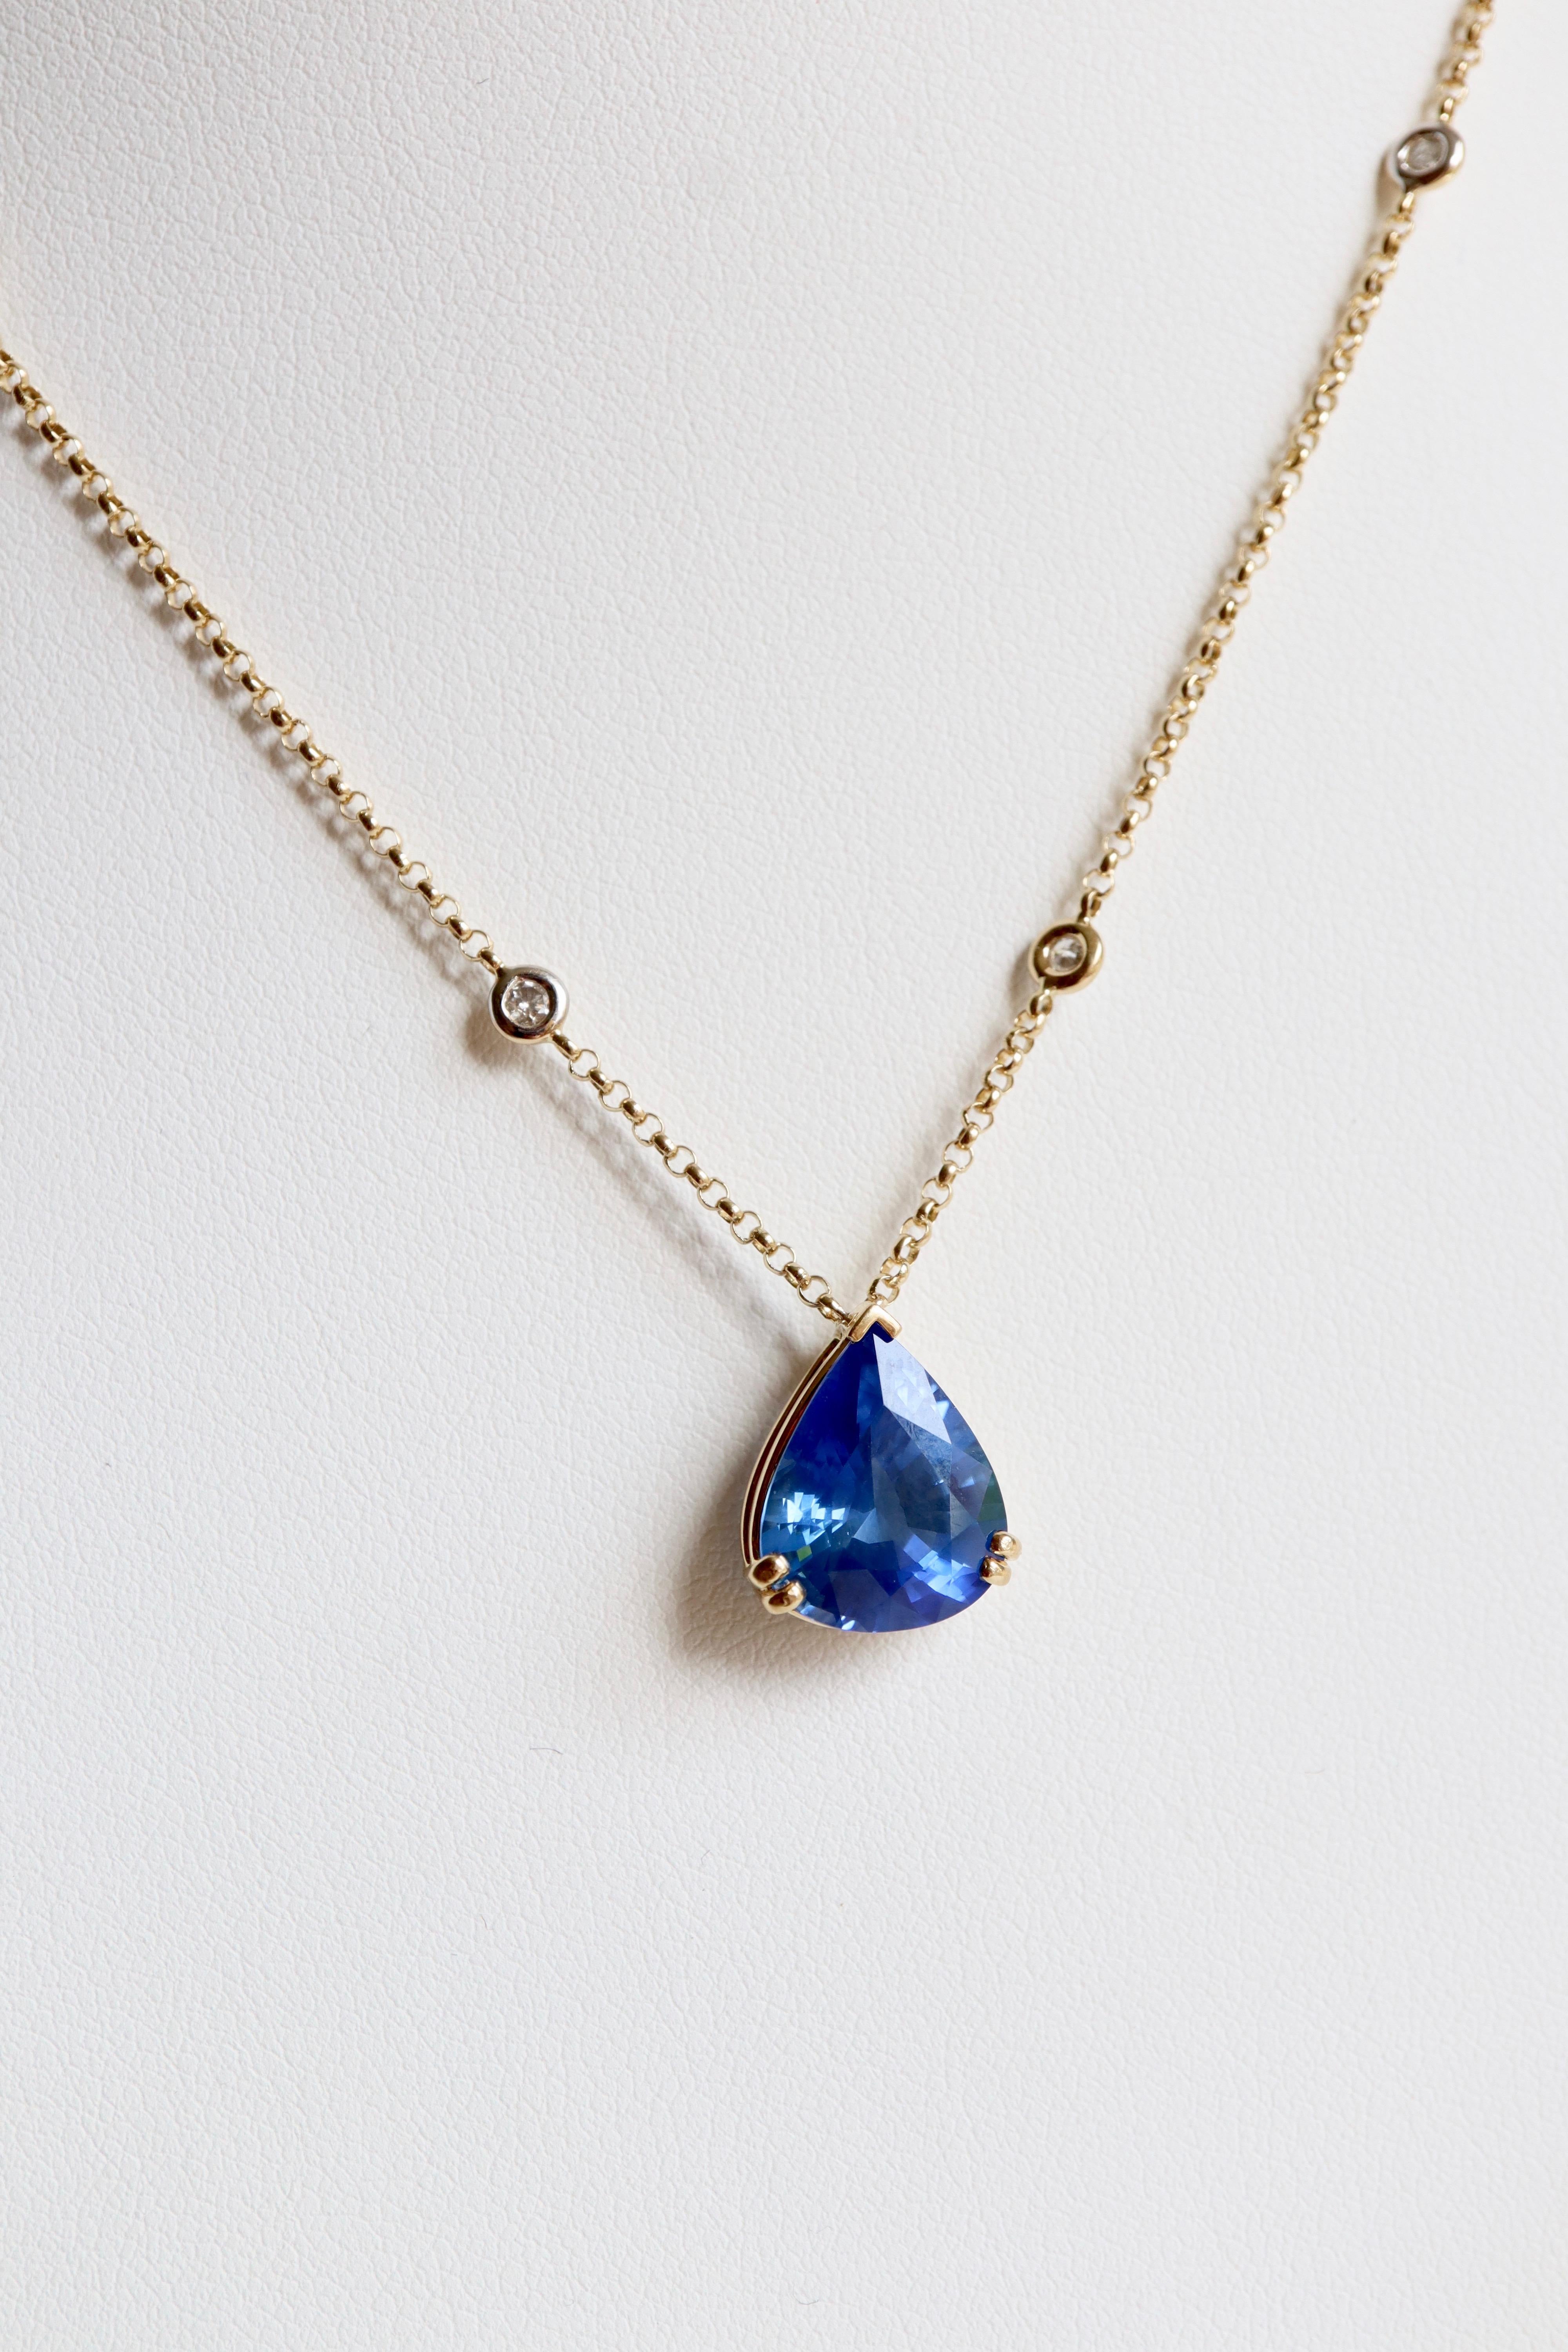 Gold Pendant with Sapphire 6.38 Carat Pear-Cut  In Good Condition For Sale In Paris, FR